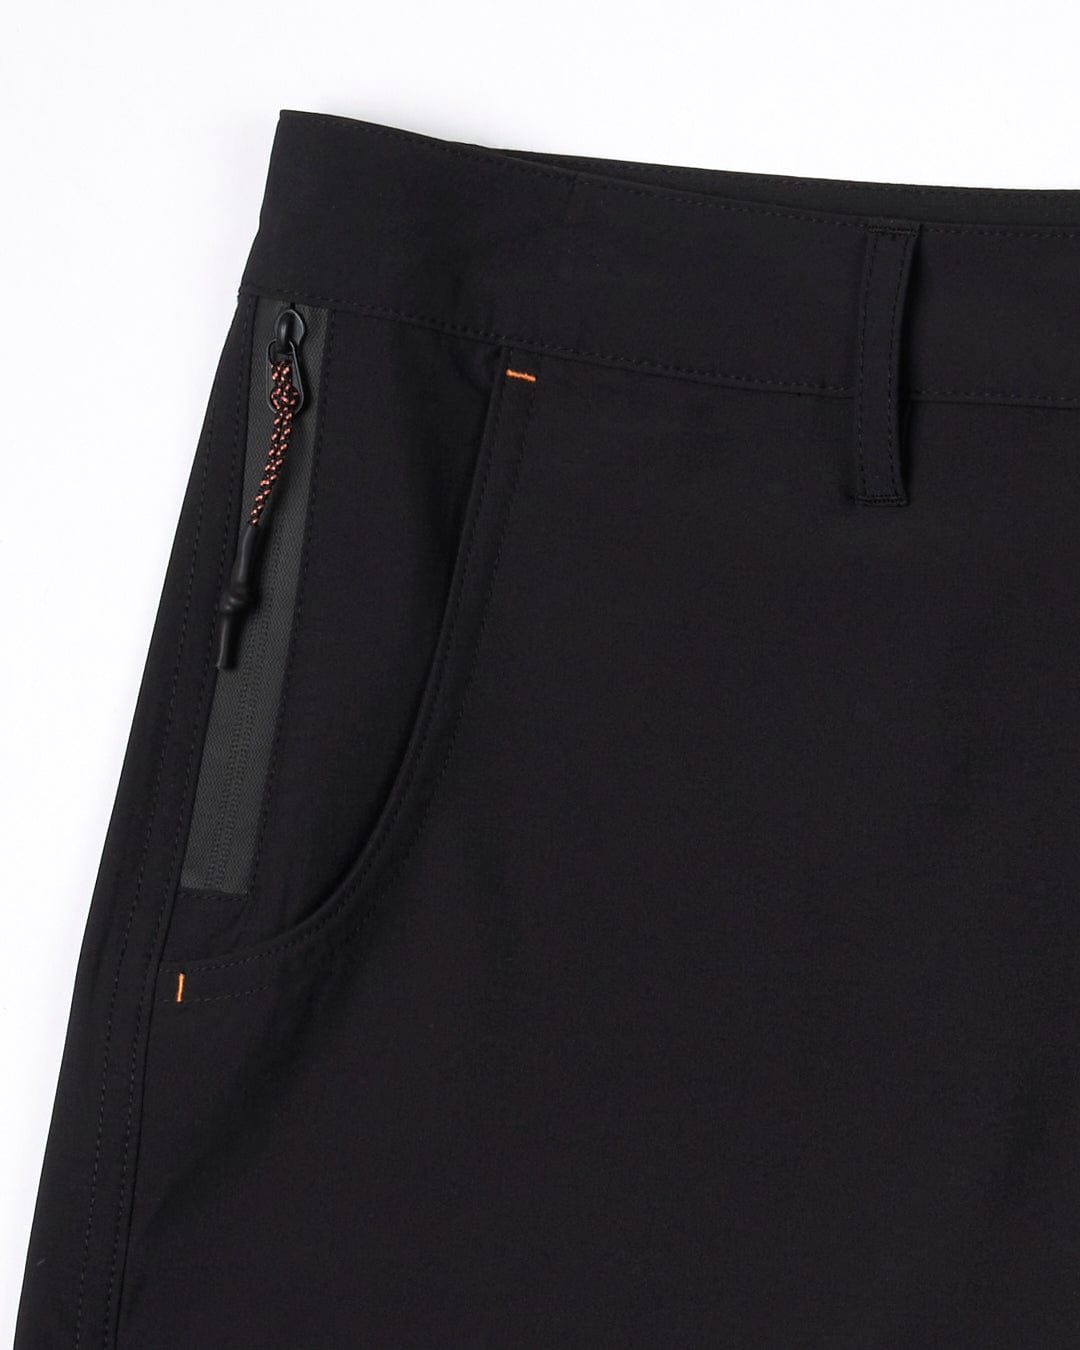 Close-up of a Saltrock Amphibian - Womens Boardshort - Black pocket with zip fastening and an orange stitch detail.